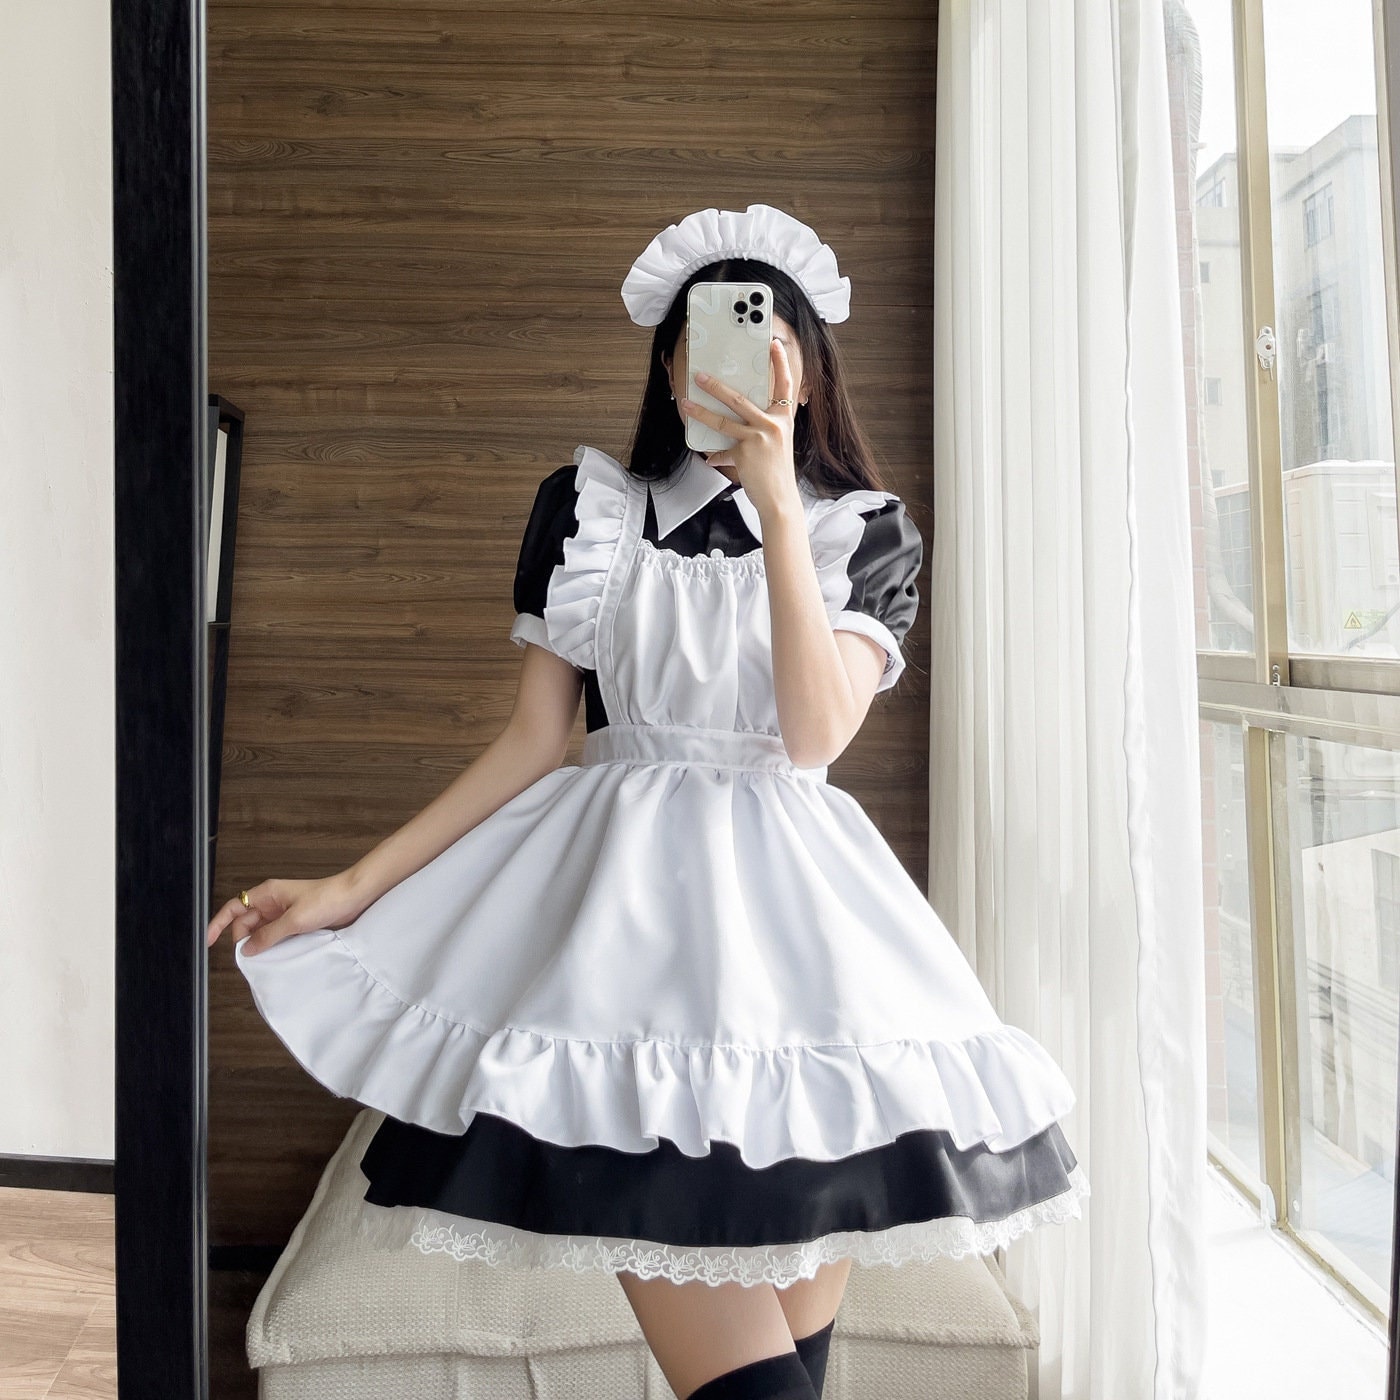 Japan Anime Cosplay Portrait of Girl with Comic Maid Costume Stock Photo   Image of lady lifestyle 209446200